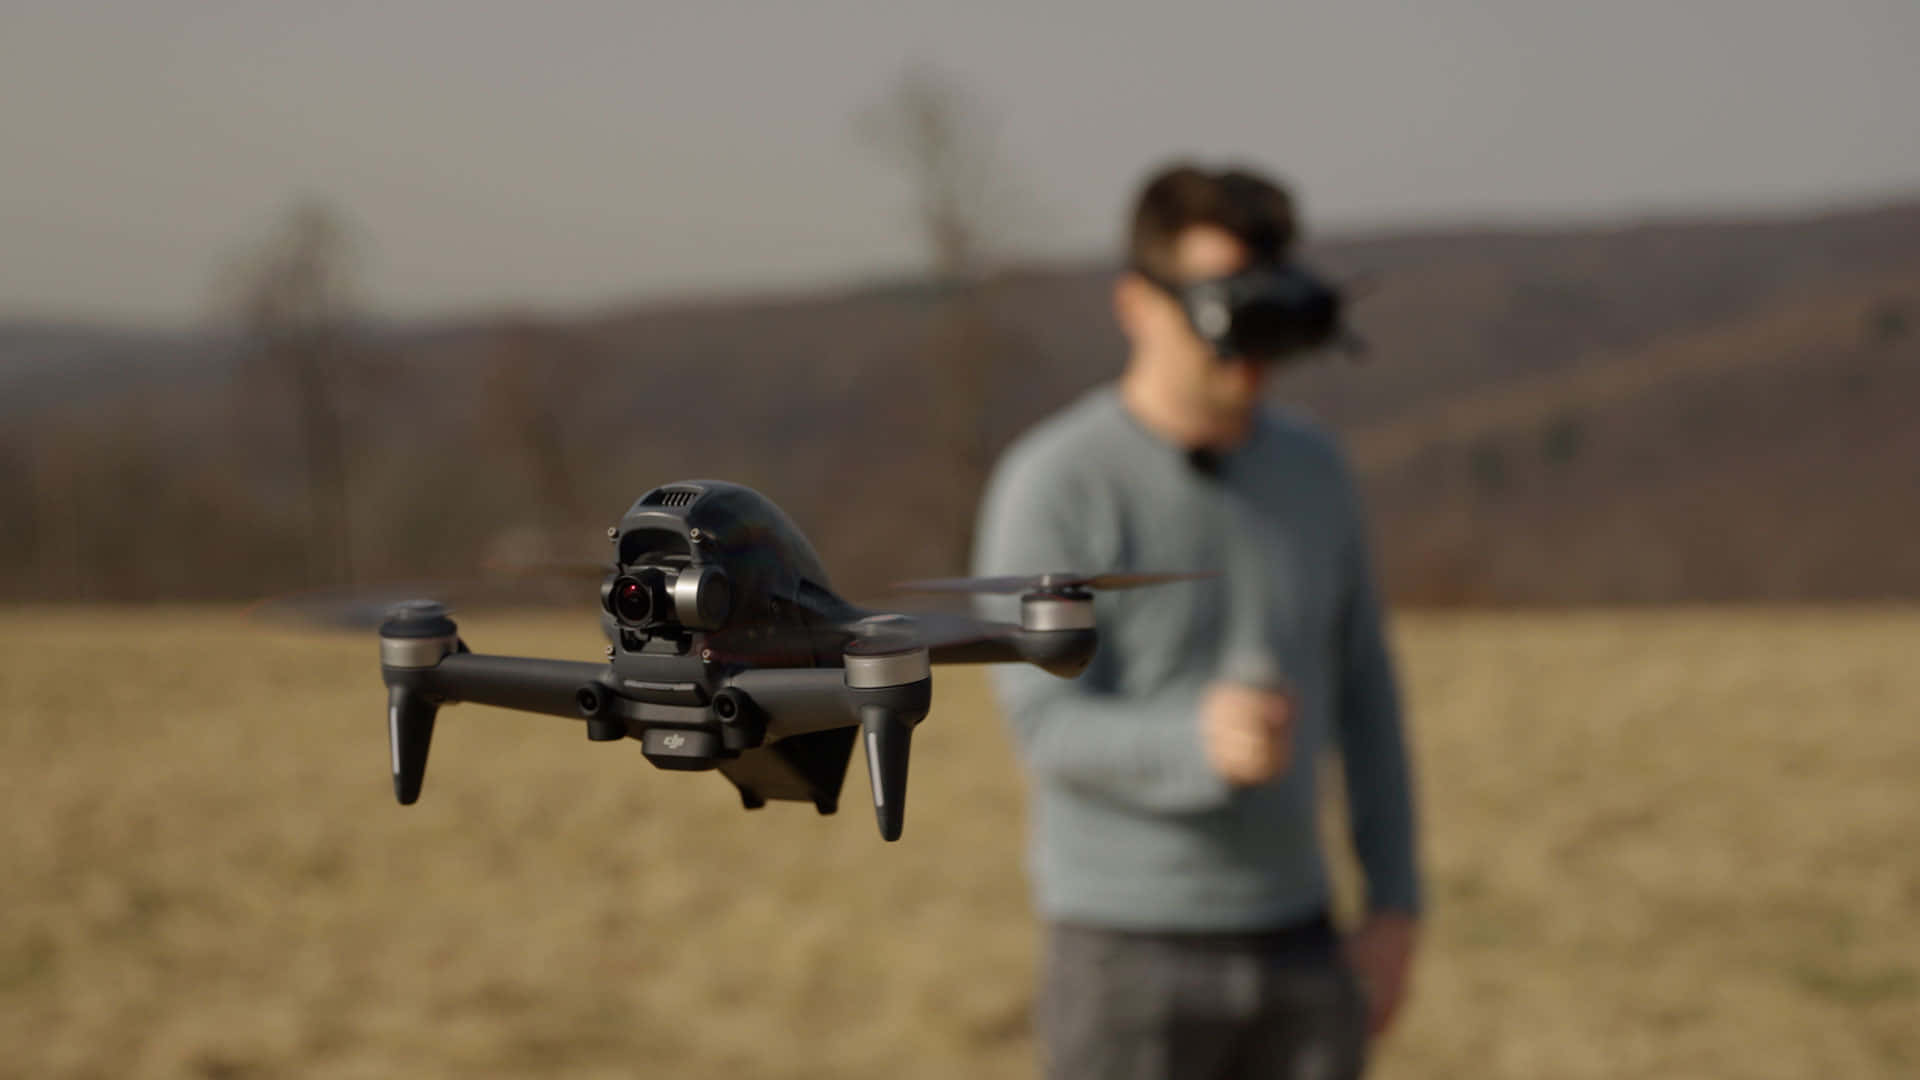 A Man Is Flying A Small Drone In A Field